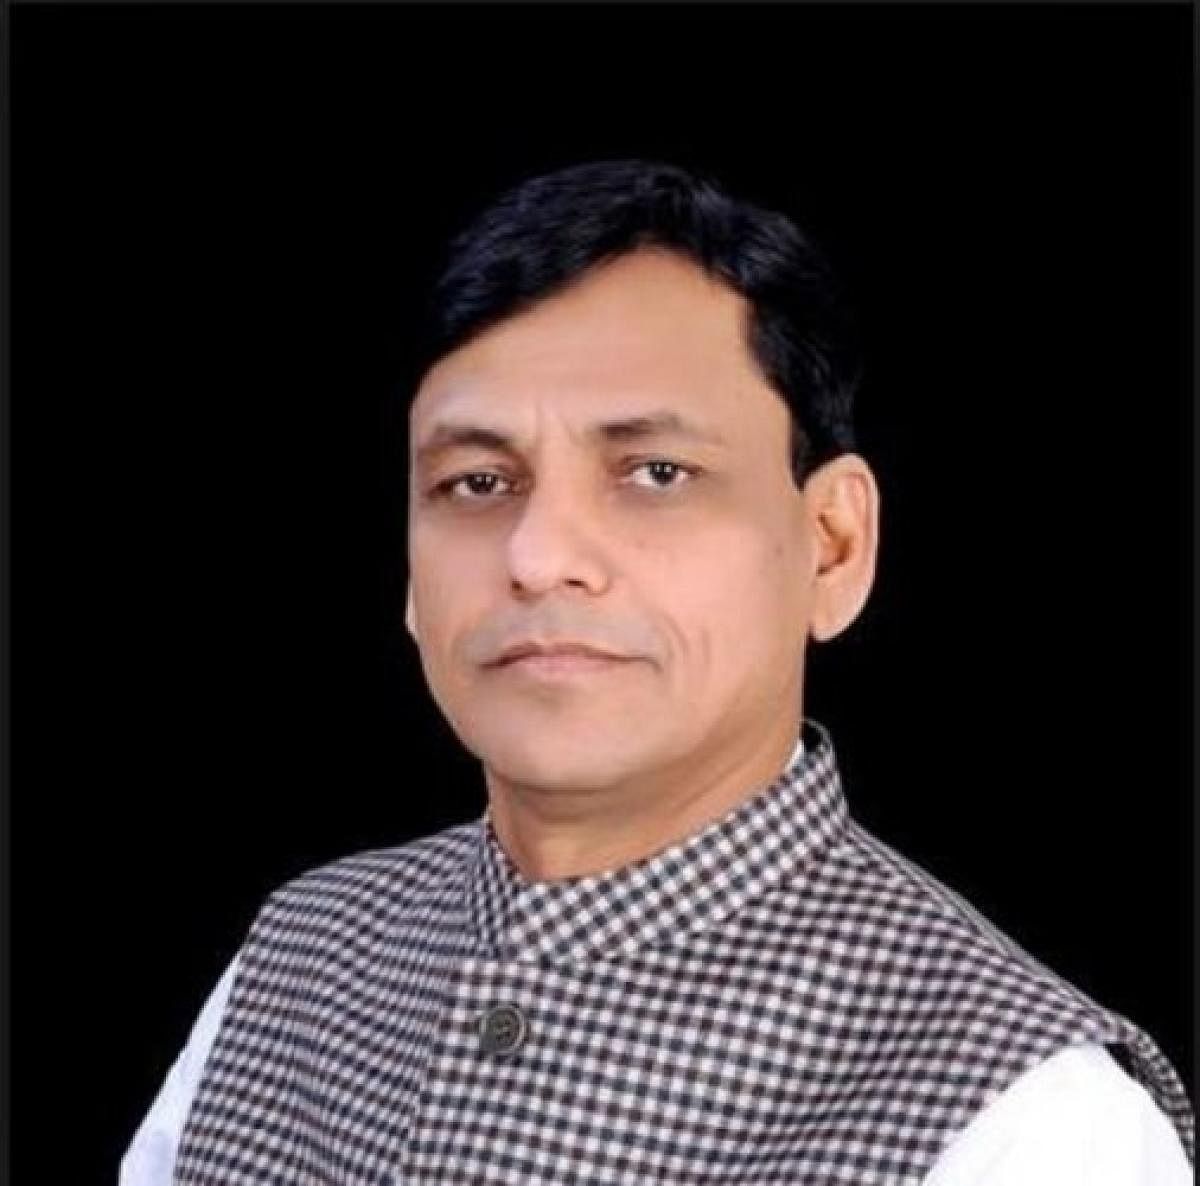 Union Minister of State for Home Nityanand Rai. (Photo credit: PRS India)